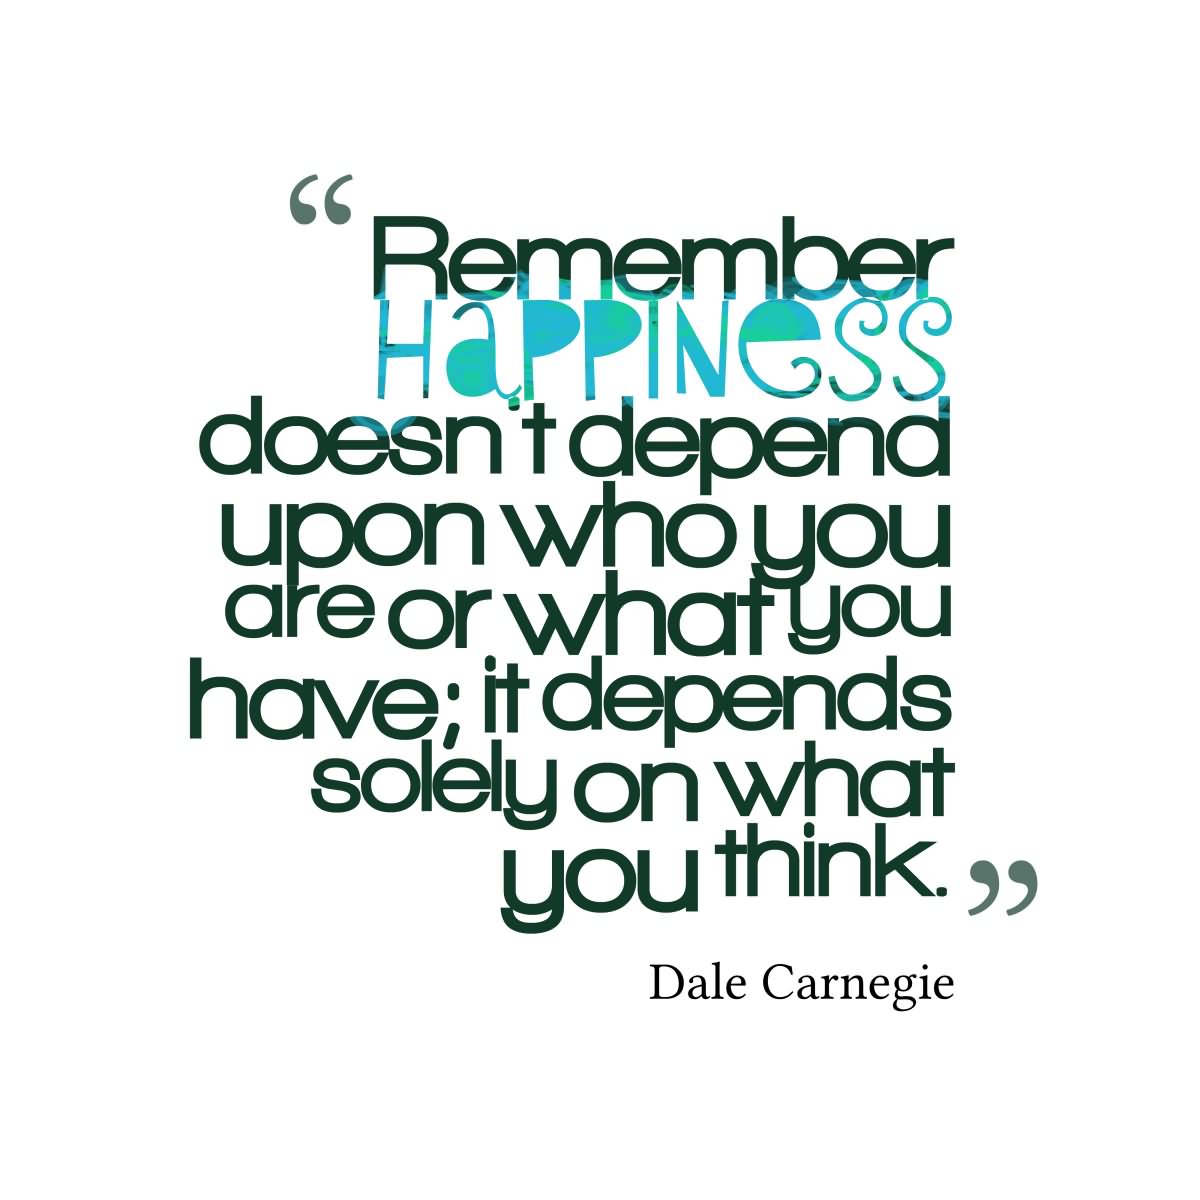 Remember, happiness doesn't depend upon who you are or what you have, it depends solely upon what you think.  -  Dale Carnegie